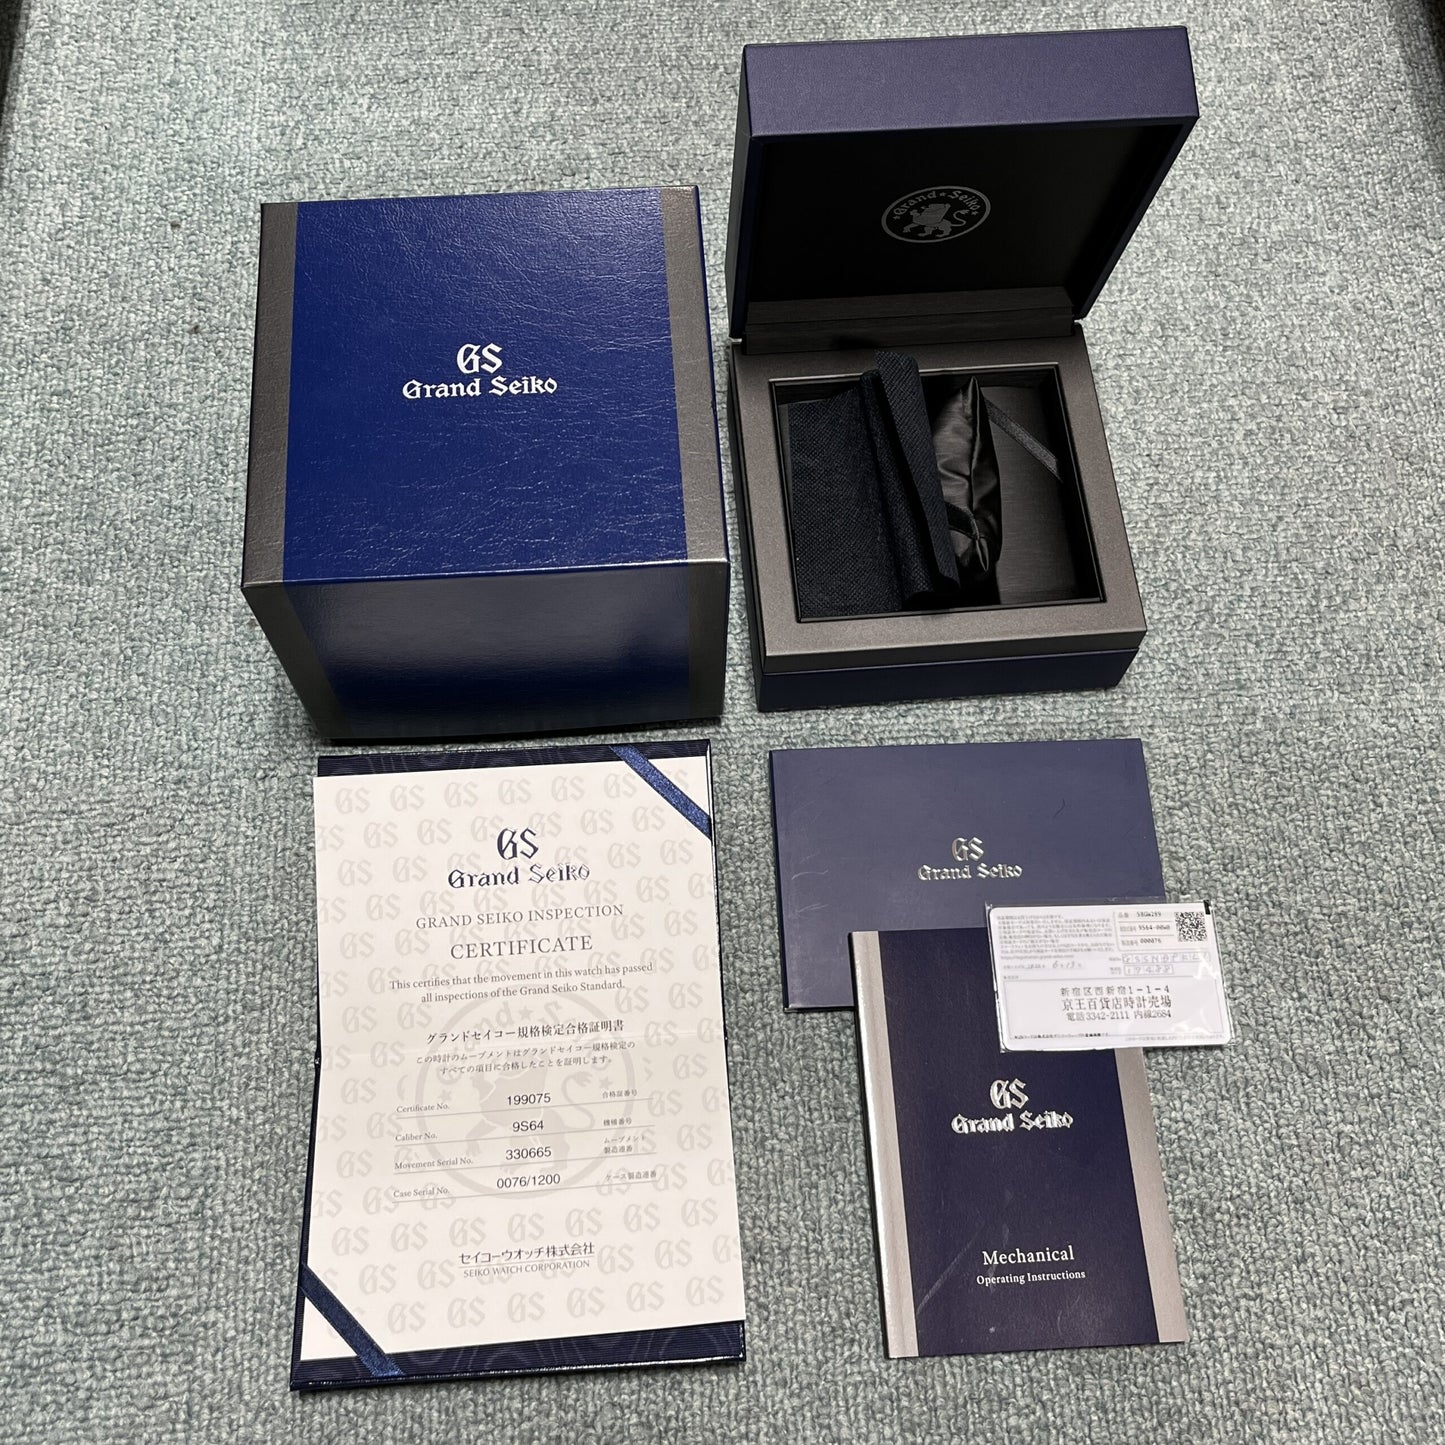 SBGW289 Heritage Collection 44GS 55th Anniversary Limited Edition 2GSE01-00066